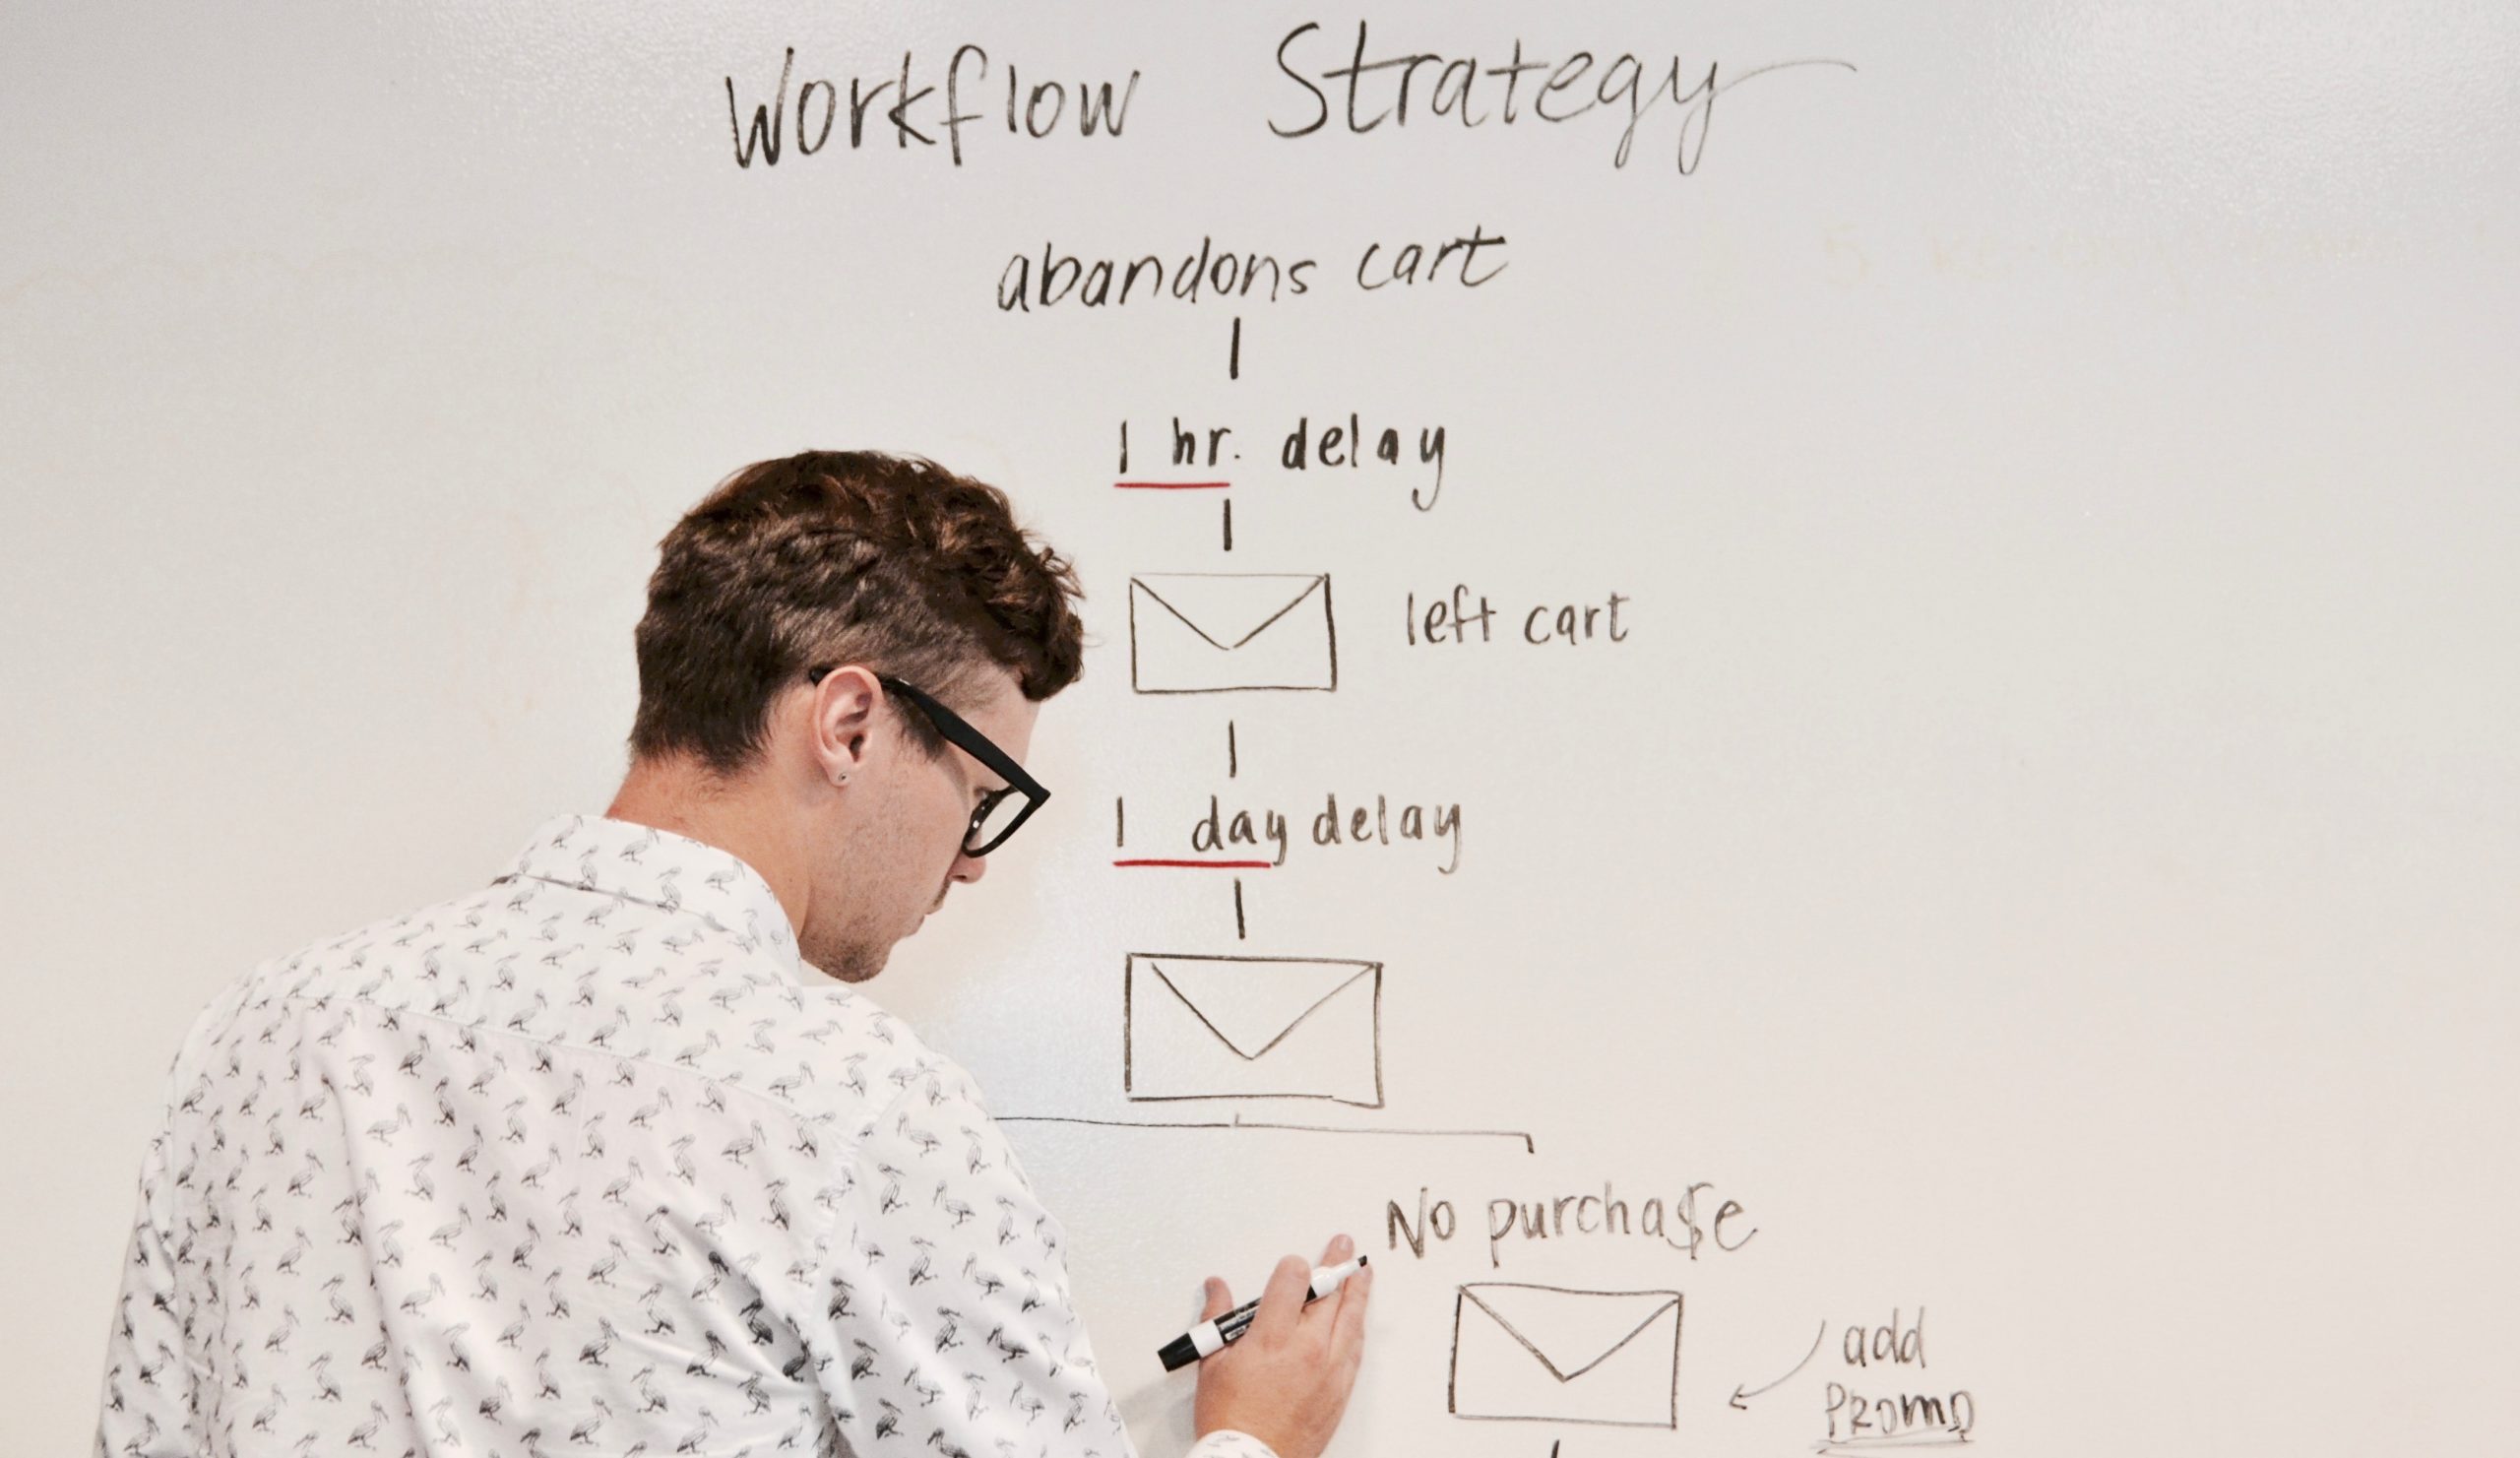 Man writing a workflow strategy on a whiteboard.